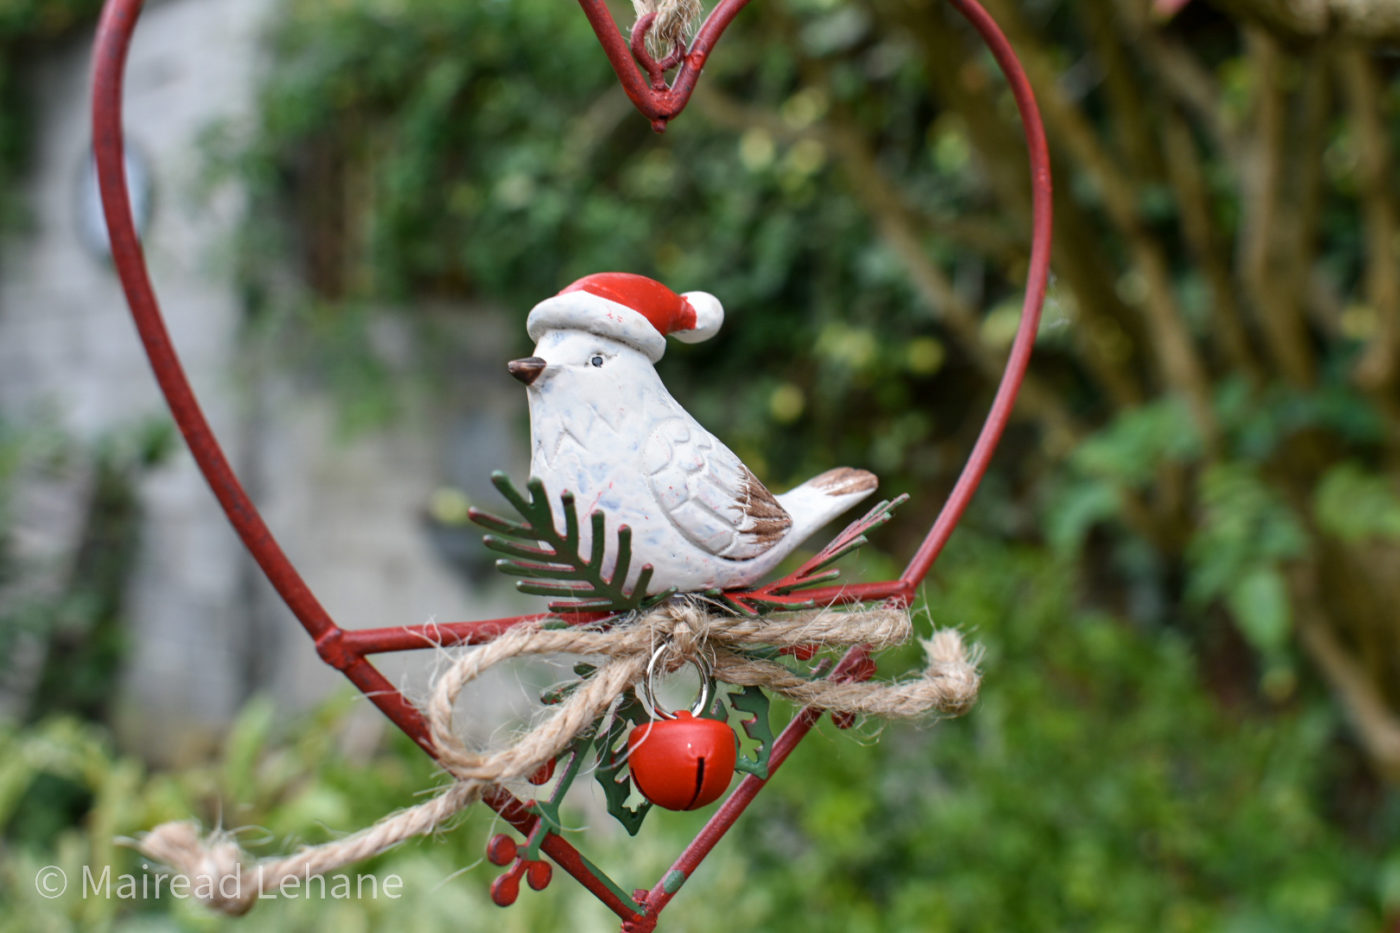 white bird decorative bird feeder in a red heart with string and a small red bell